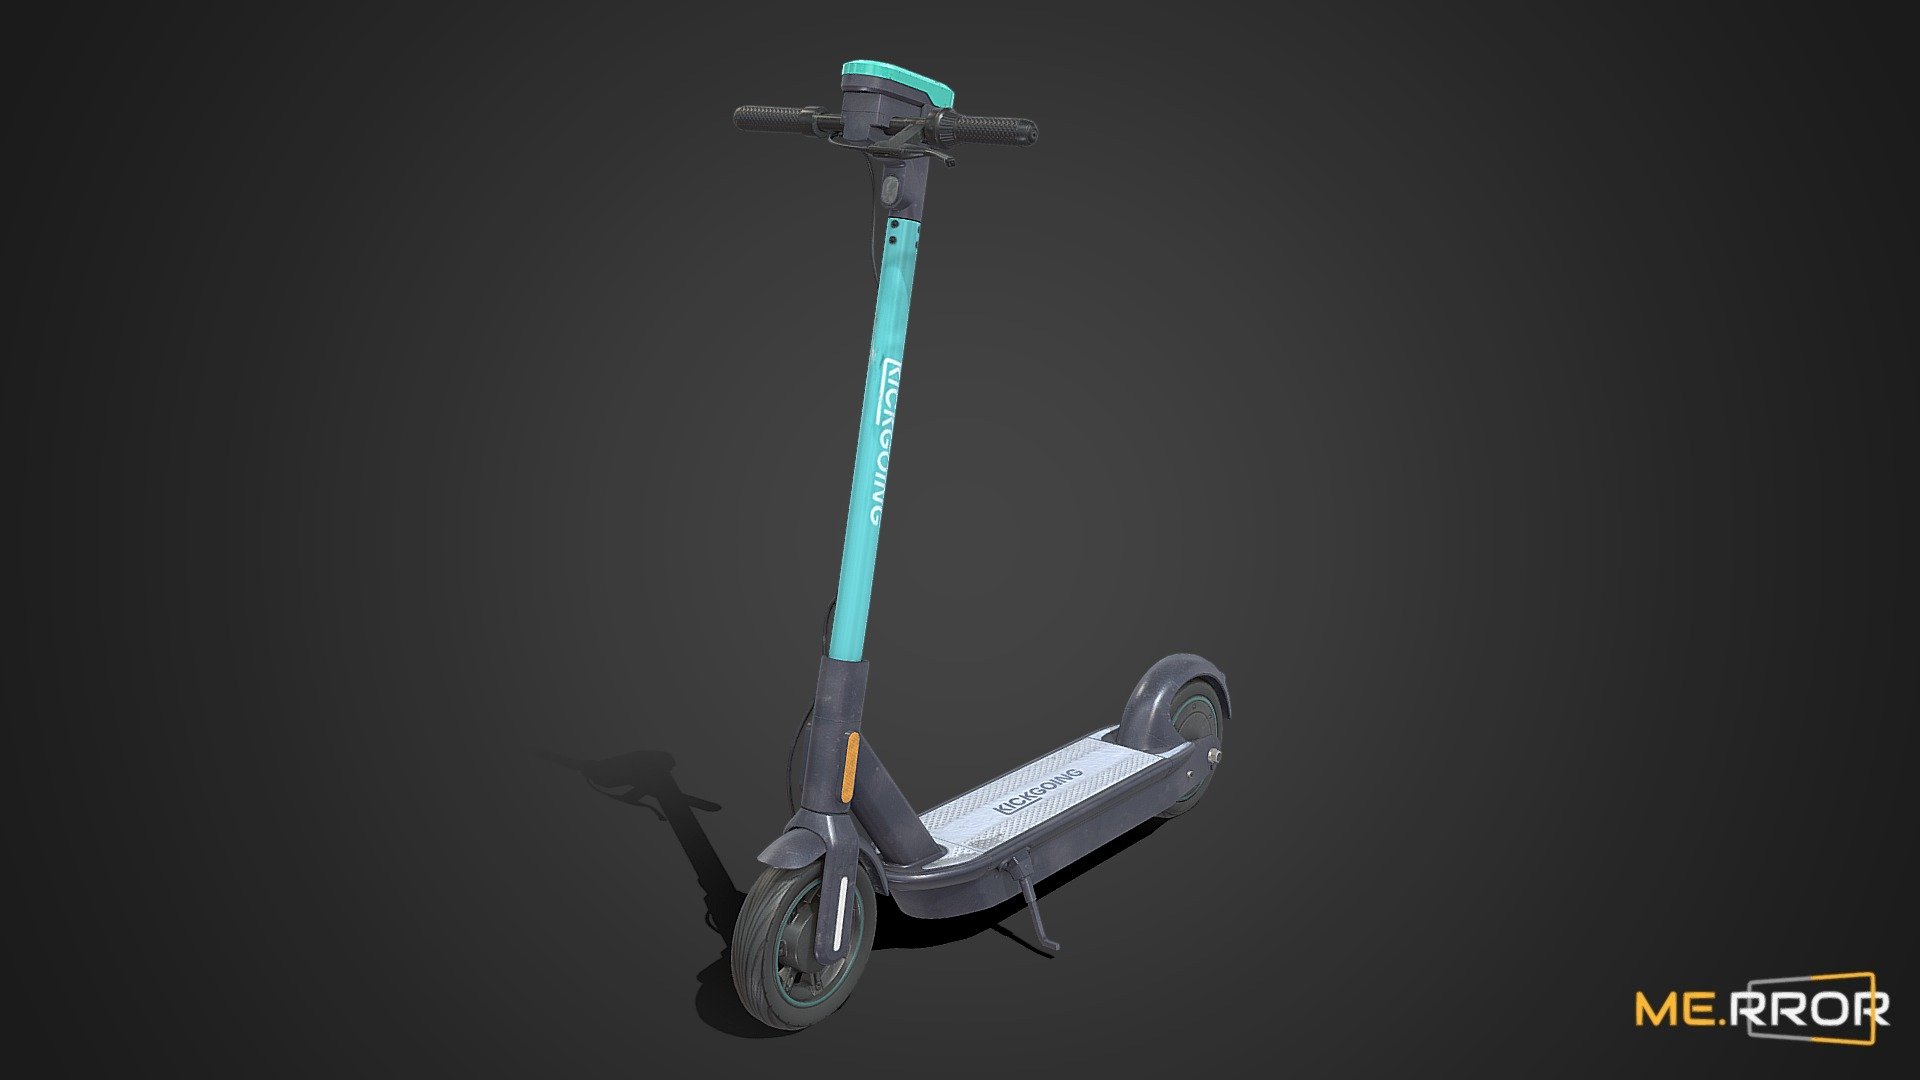 MERROR is a 3D Content PLATFORM which introduces various Asian assets to the 3D world


3DScanning #Photogrametry #ME.RROR - [Game-Ready] Electric Kickboard - Buy Royalty Free 3D model by ME.RROR (@merror) 3d model